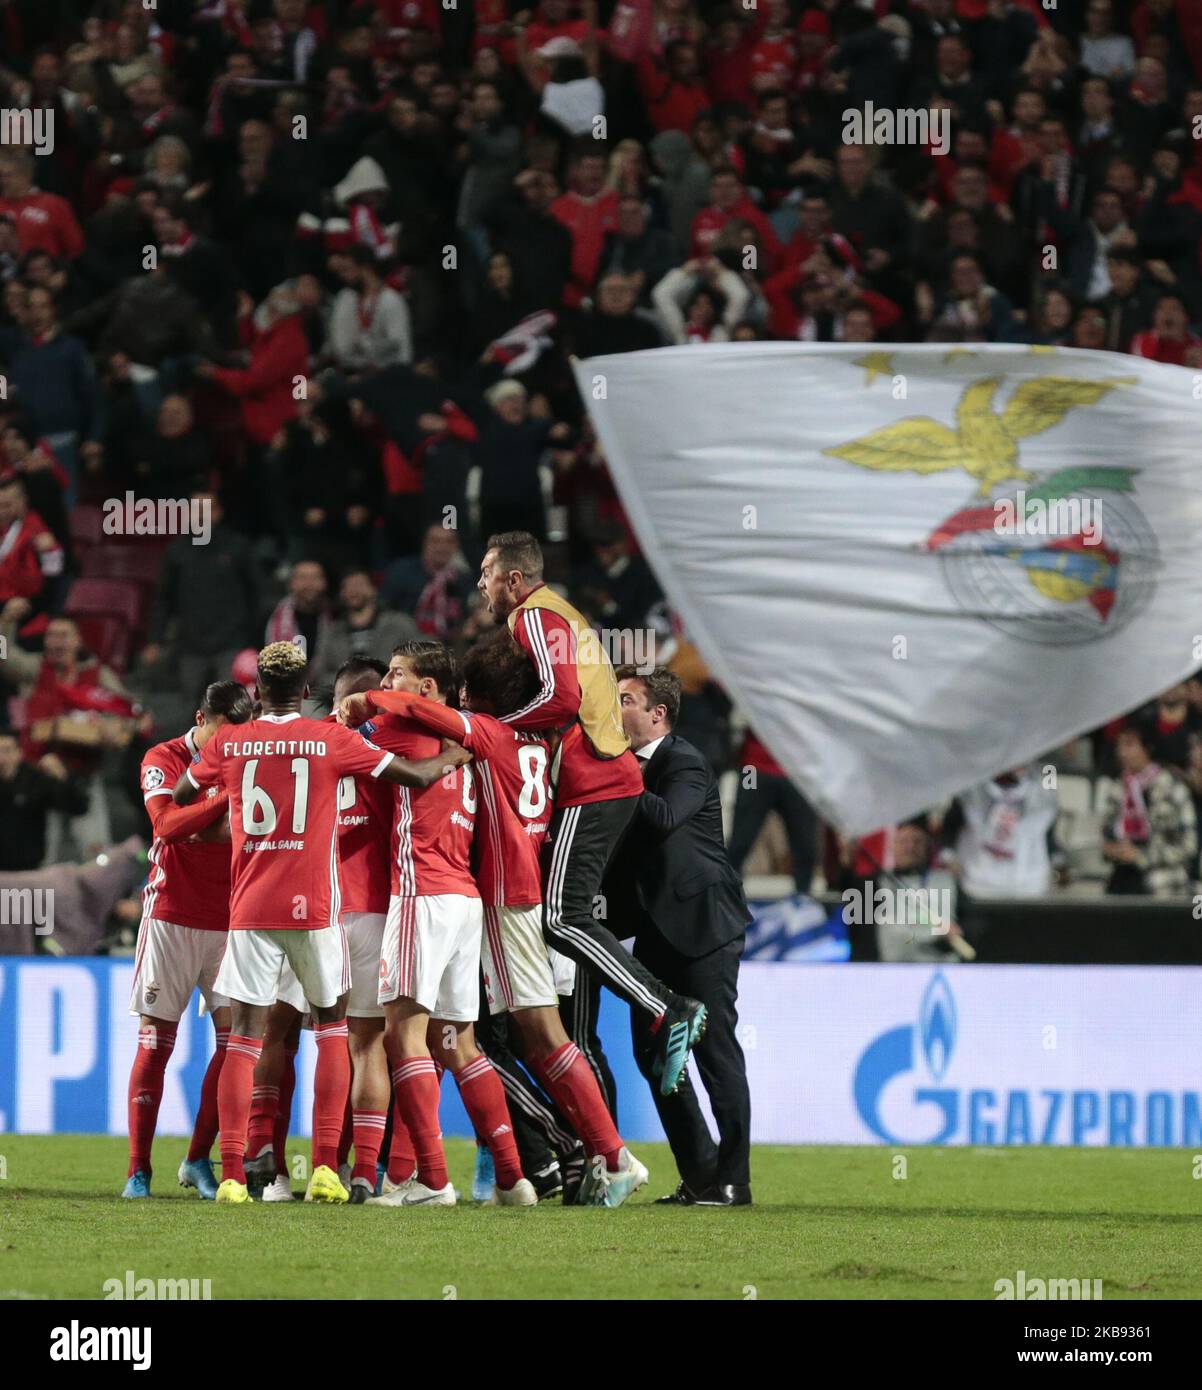 SL Benfica Team celebrates during the UEFA Champions League Group G match between SL Benfica and Olympique Lyon at Estadio da Luz on October 23, 2019 in Lisbon, Portugal. (Photo by Paulo Nascimento/DPI/NurPhoto) Stock Photo